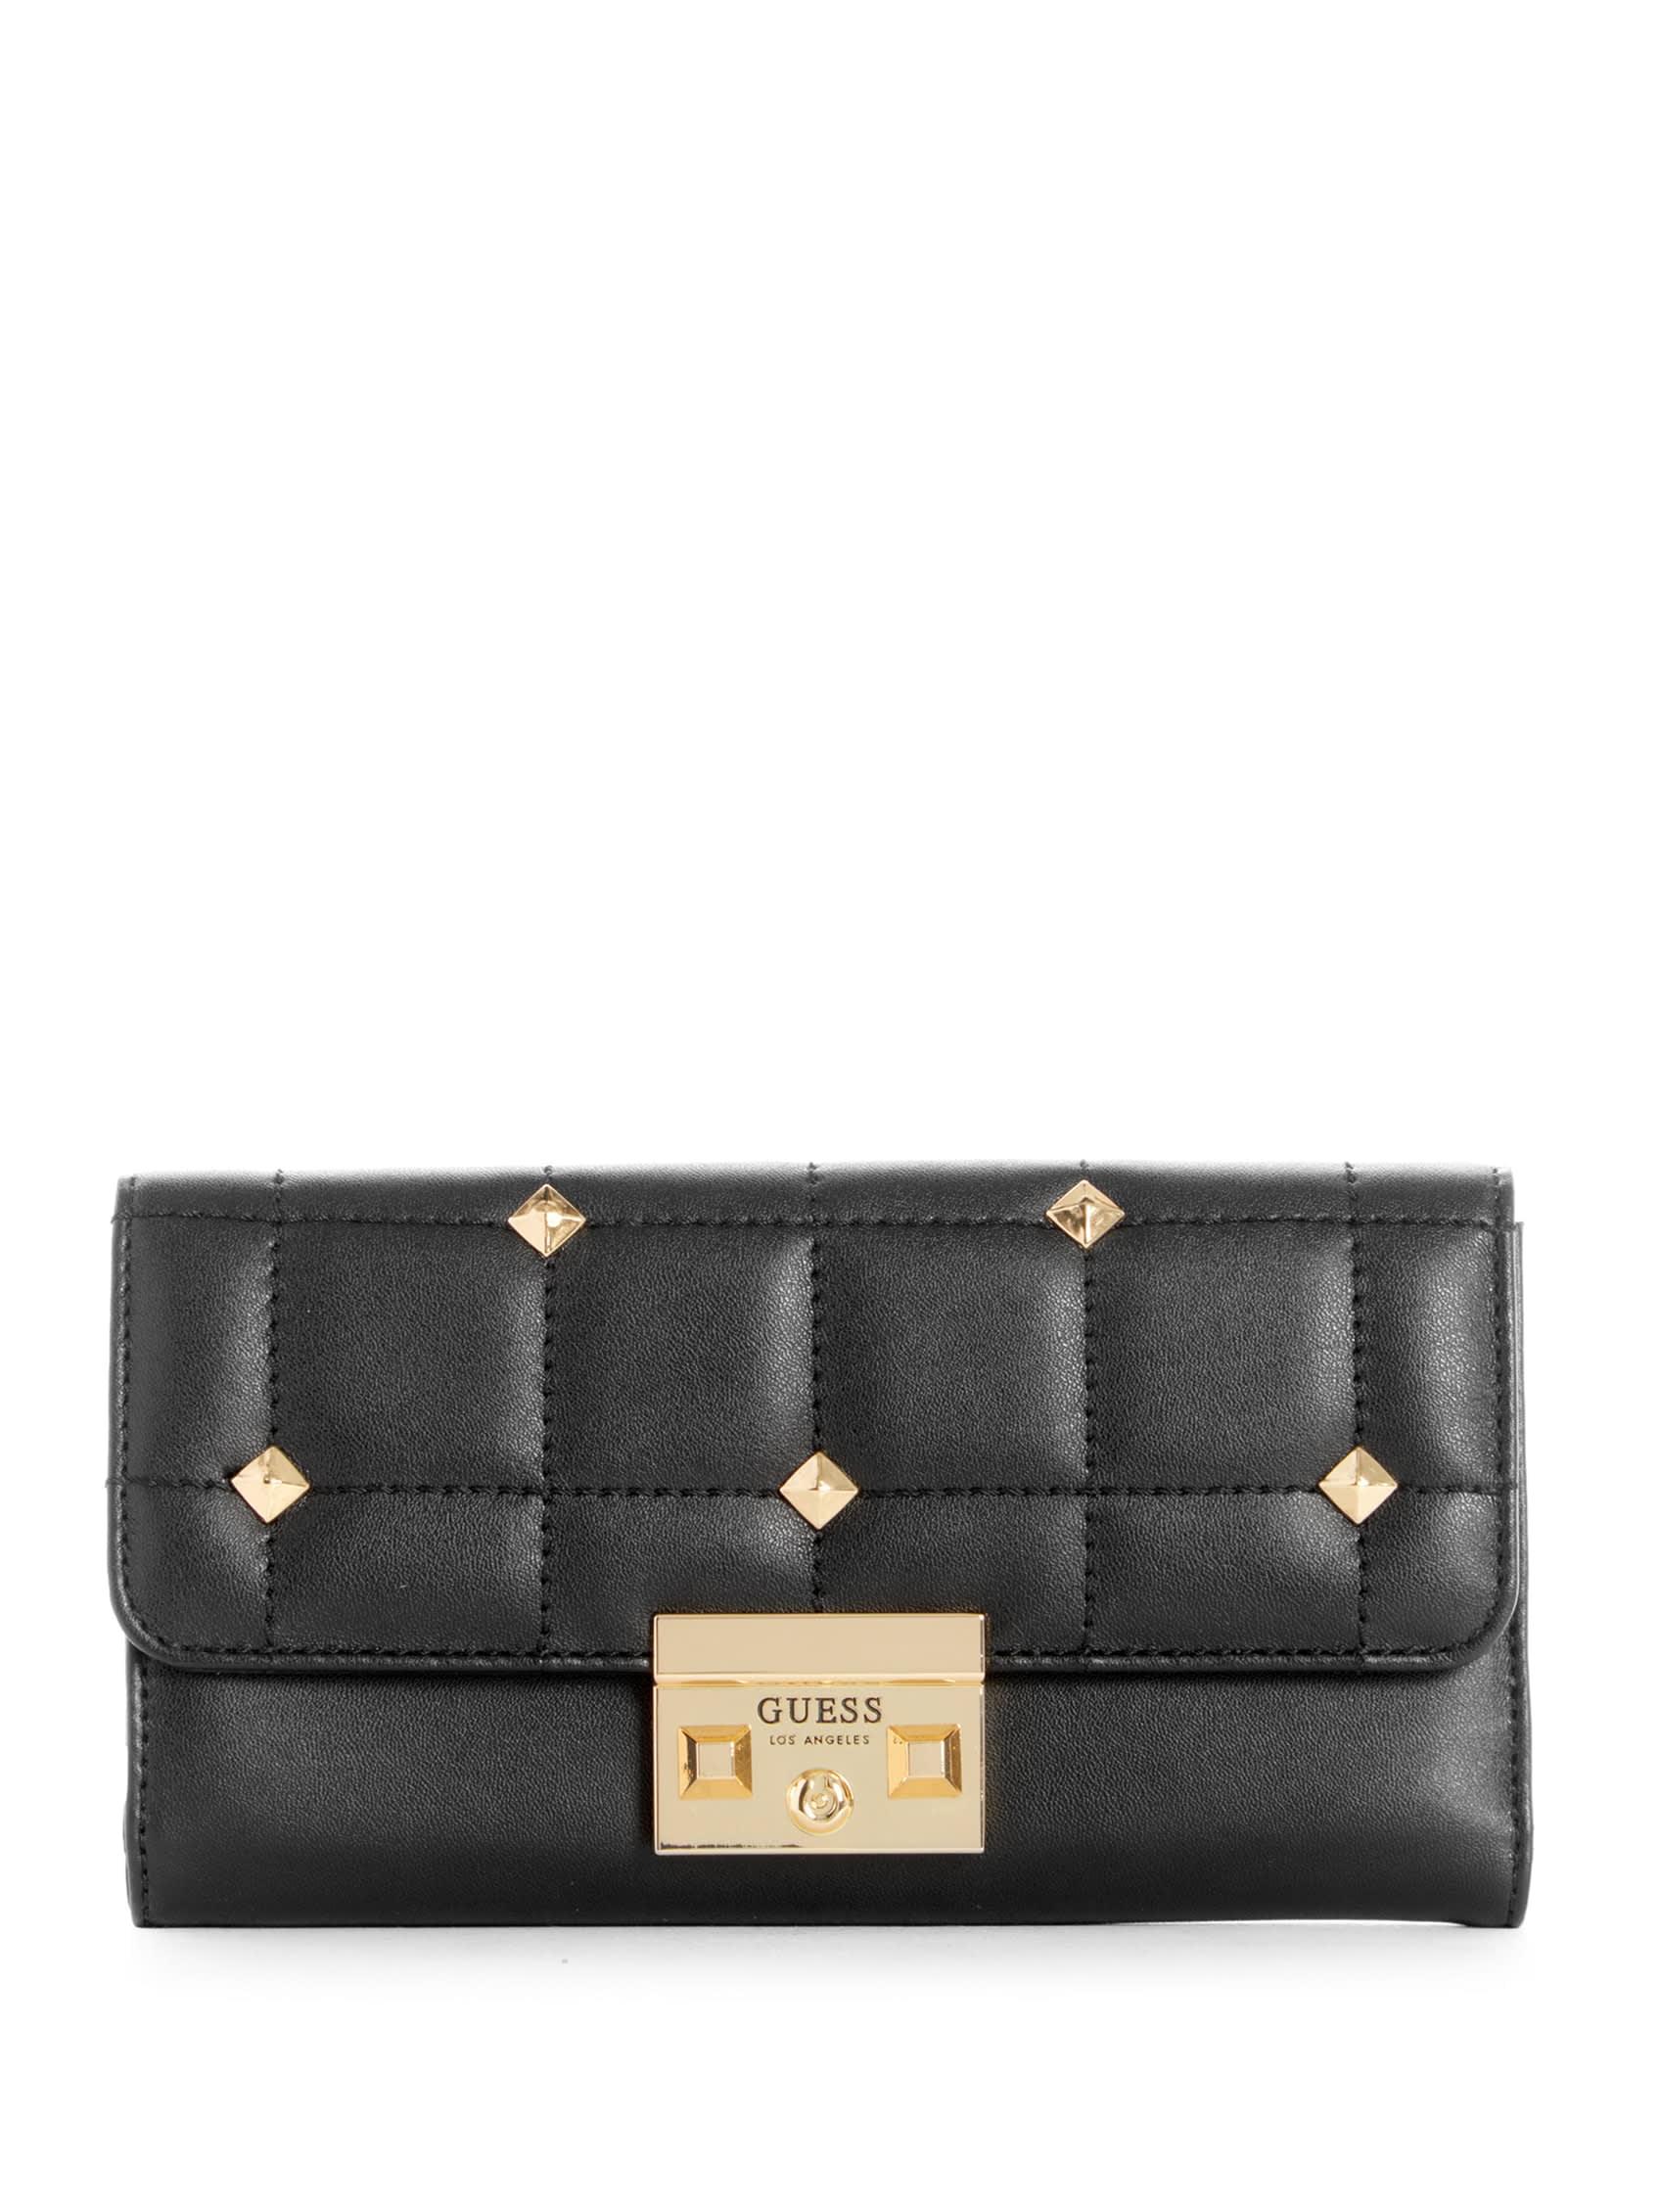 Guess Factory Sole Studded Multi Clutch in Black | Lyst